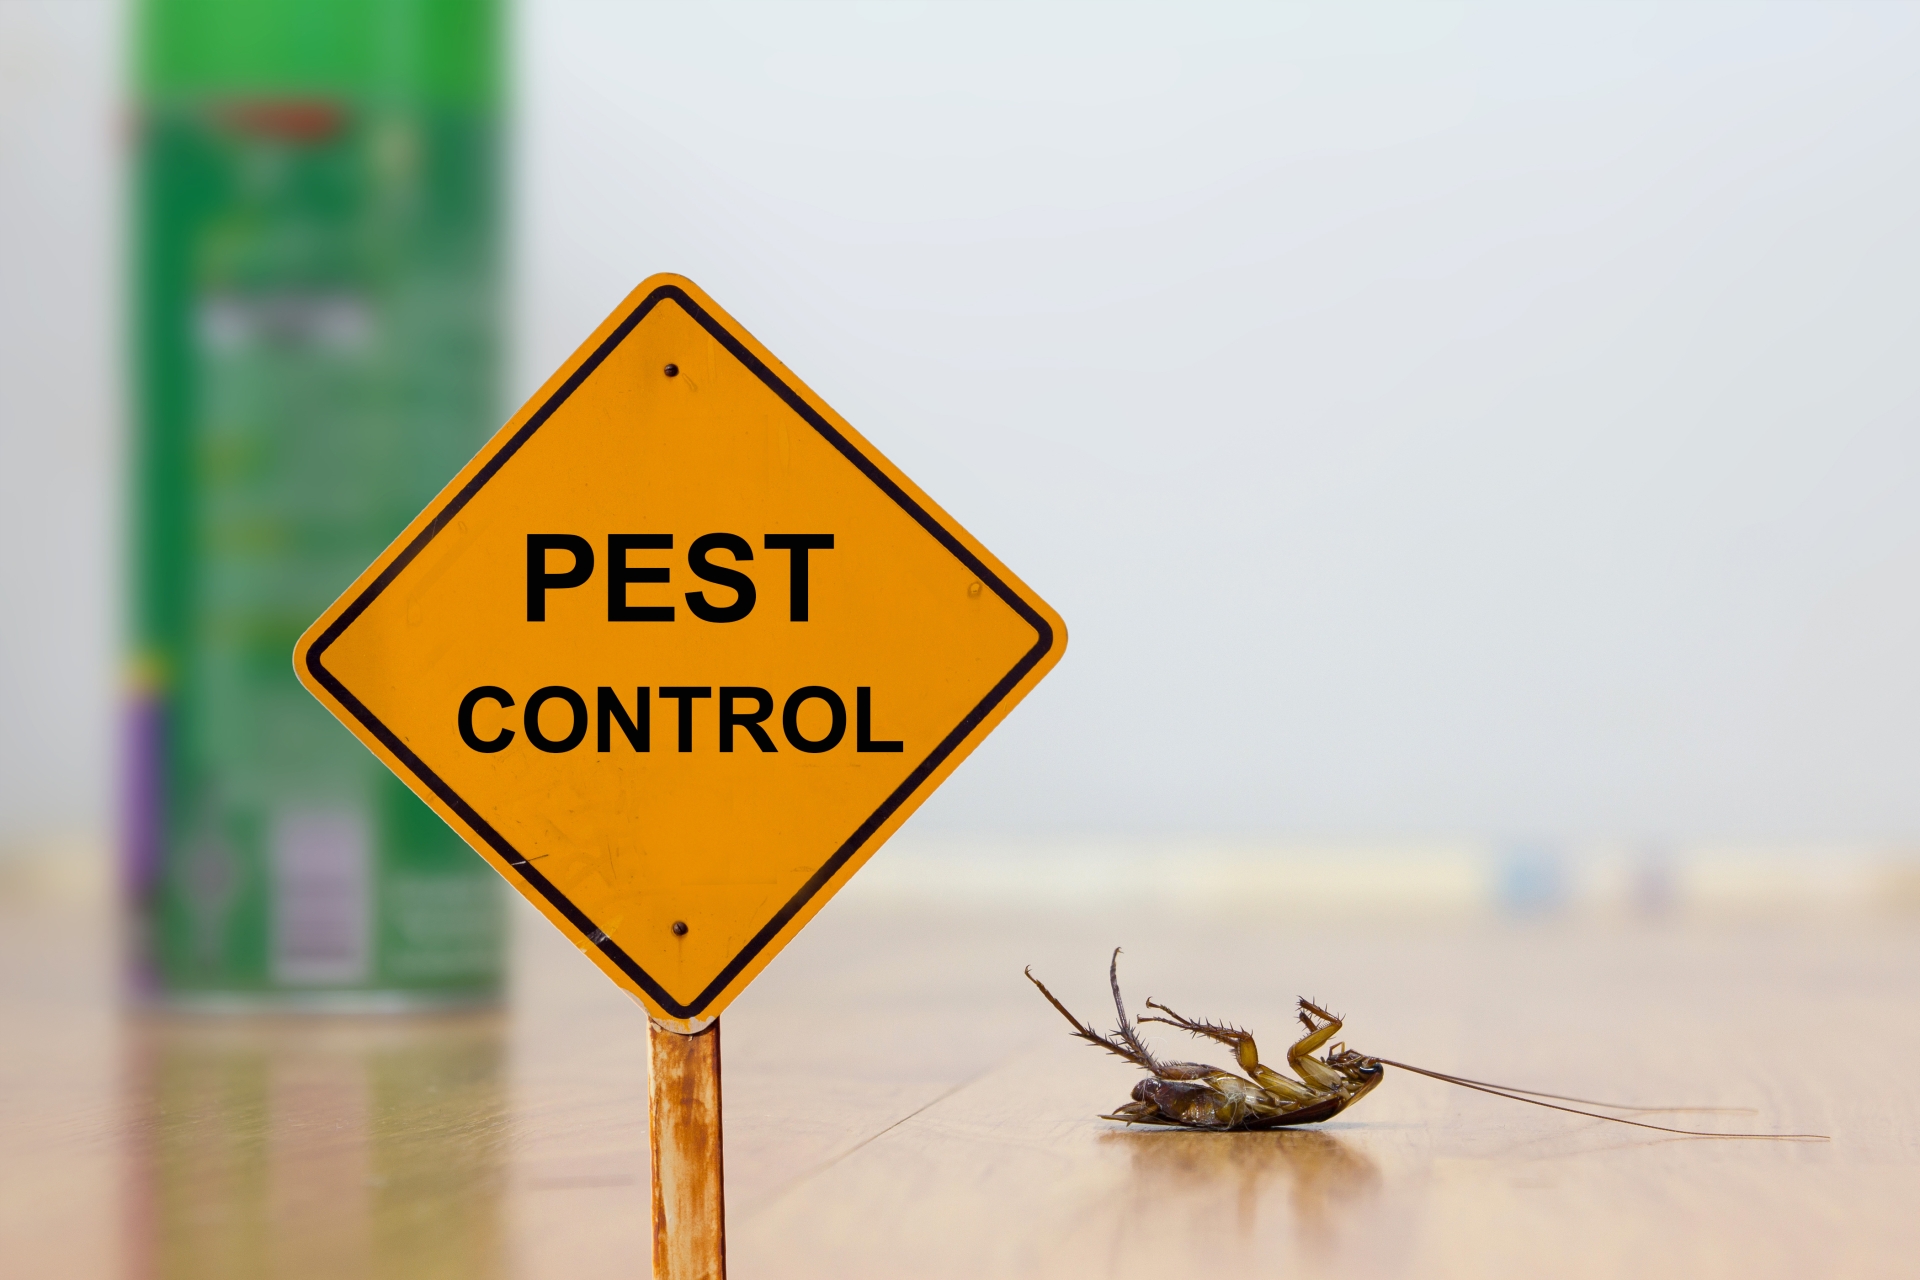 24 Hour Pest Control, Pest Control in Coulsdon, Old Coulsdon, Chipstead, CR5. Call Now 020 8166 9746